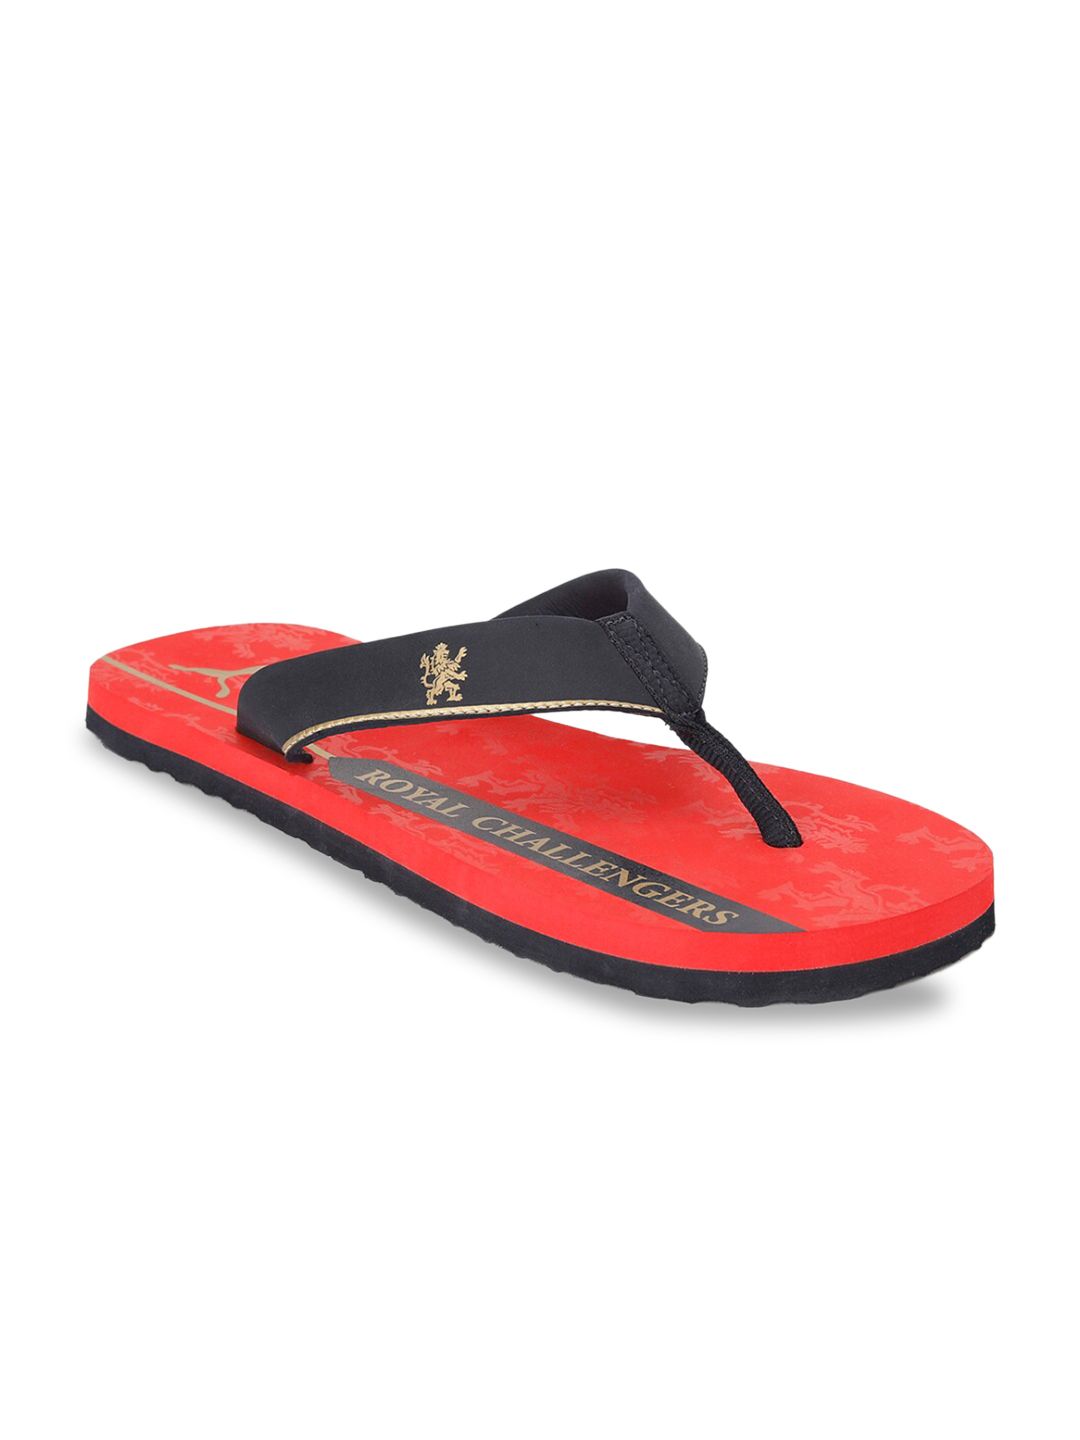 Puma Unisex Navy Blue & Red Printed Thong Flip-Flops Price in India